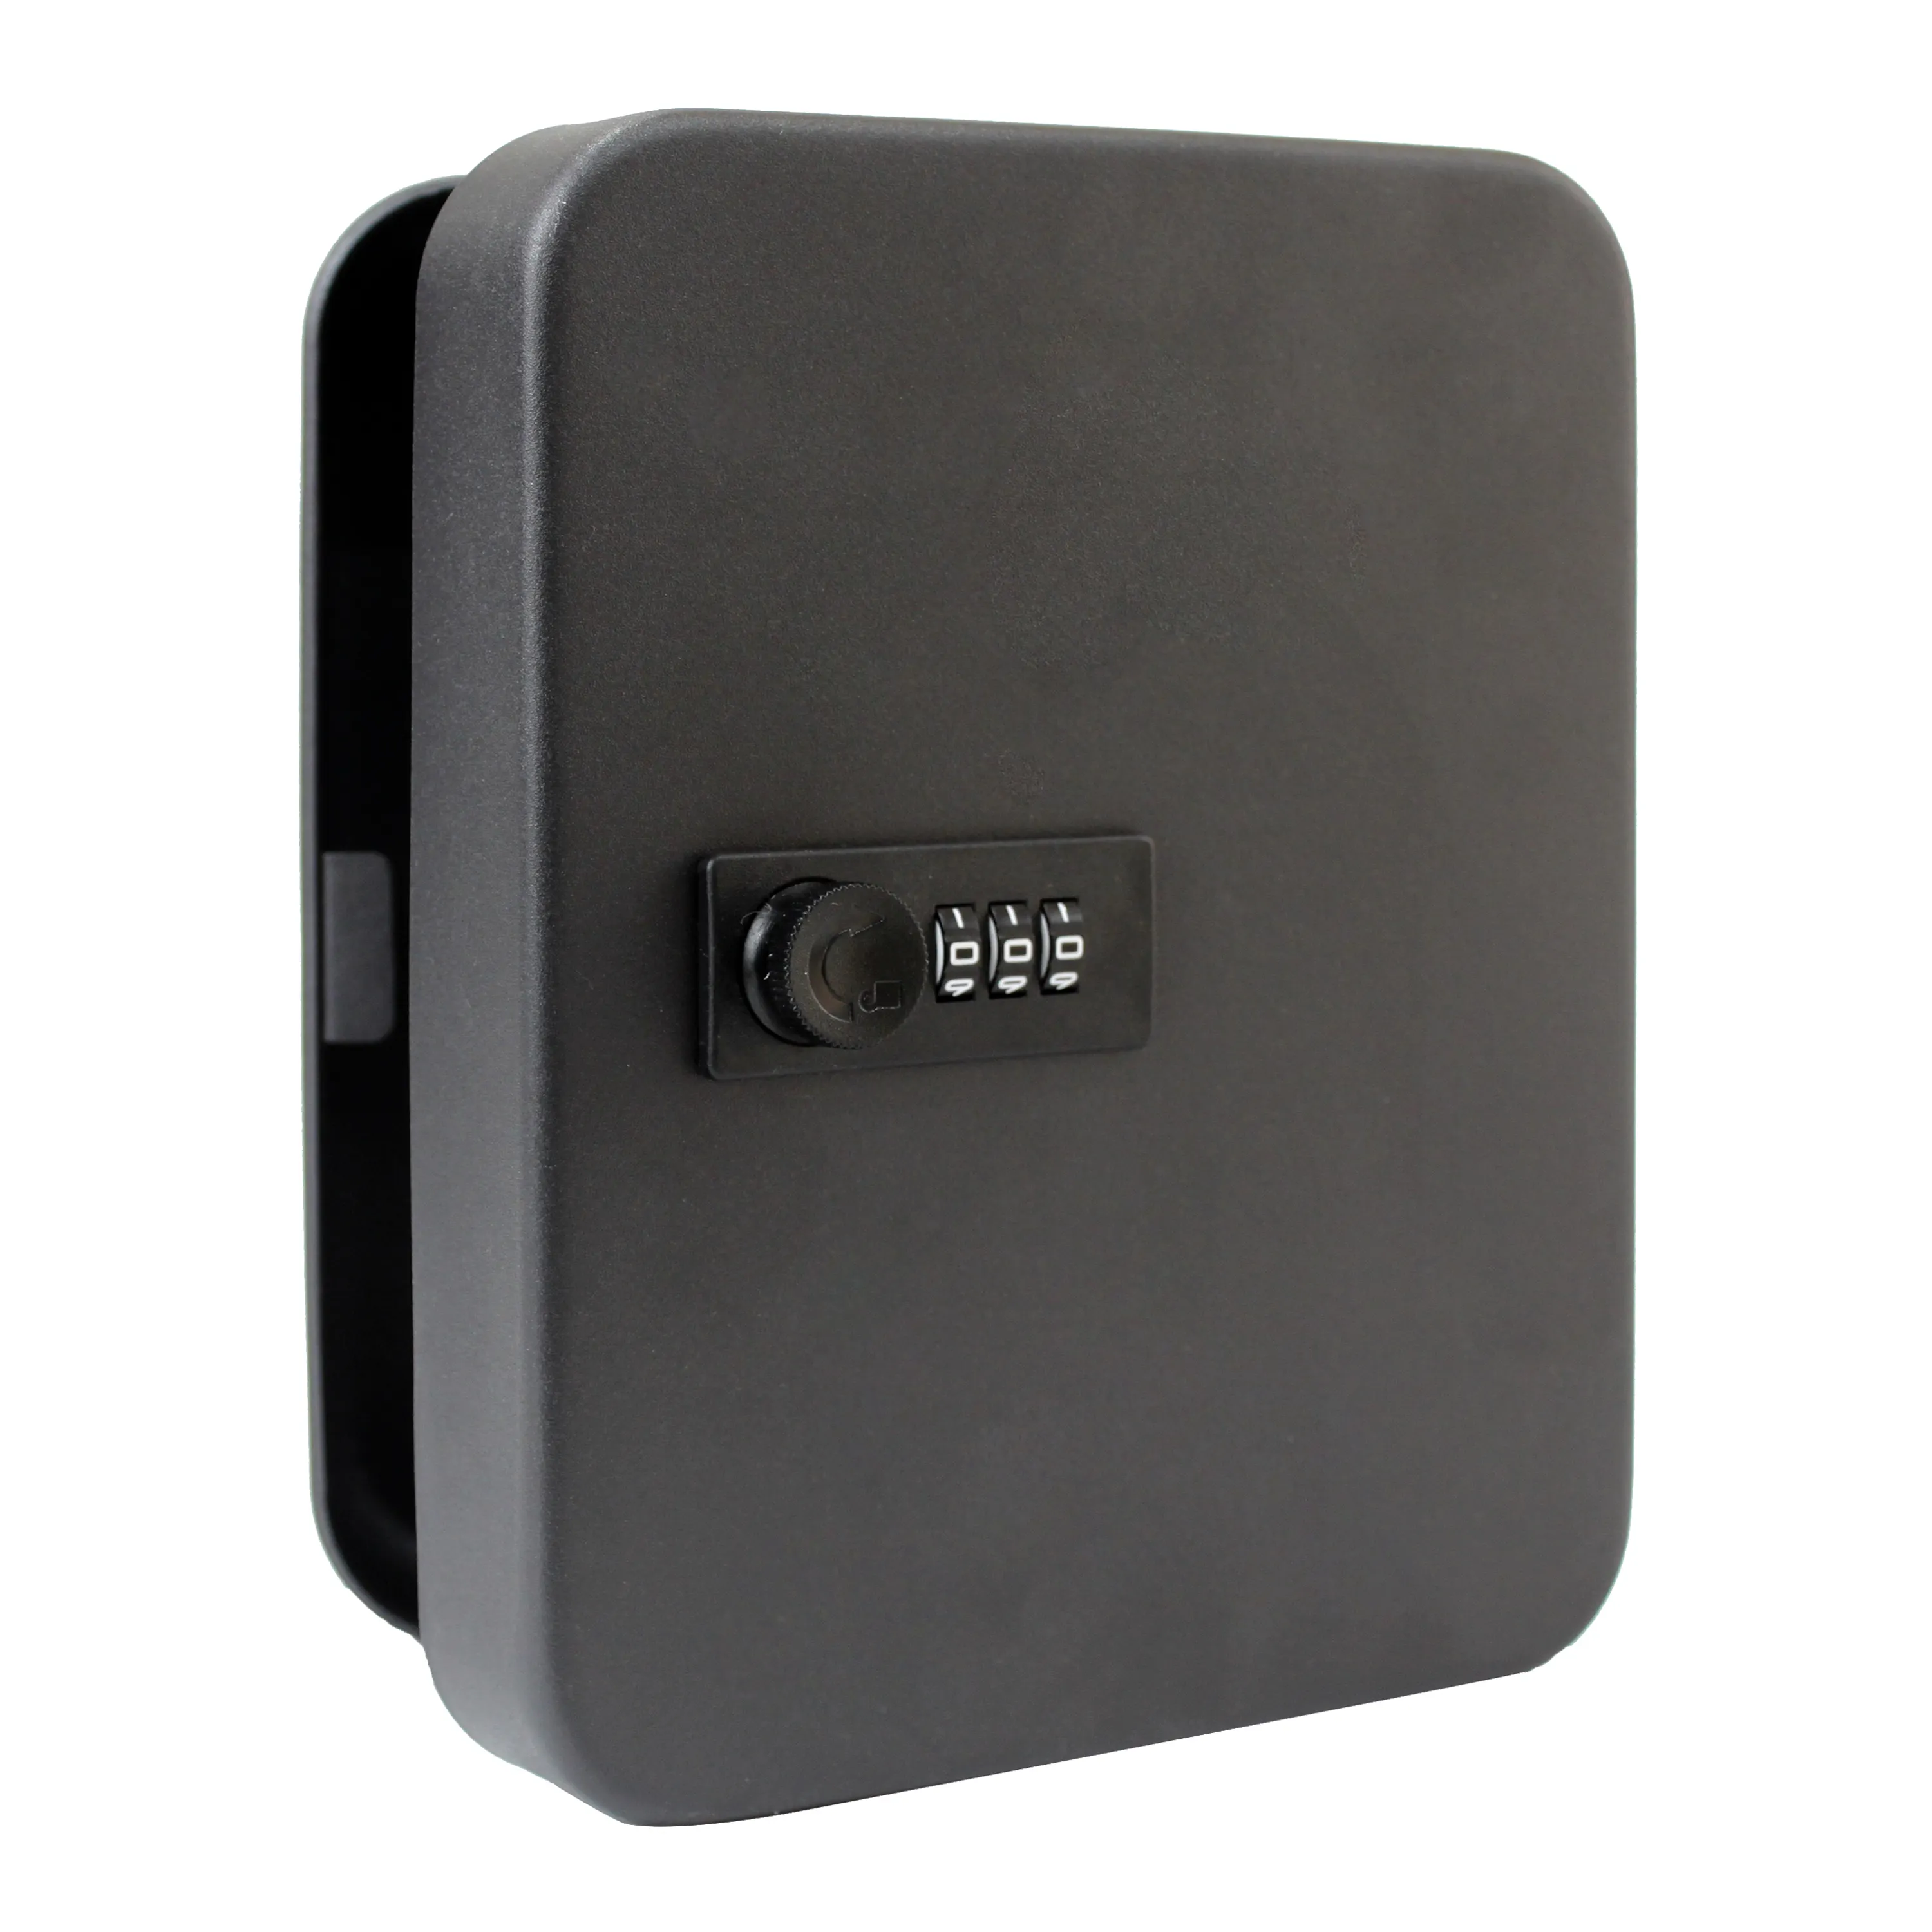 Design Best Price OEM Accept No Minimum Wall Mounted Key Storage SafeSecure External Key BoxHanging Box For Key Factory in C